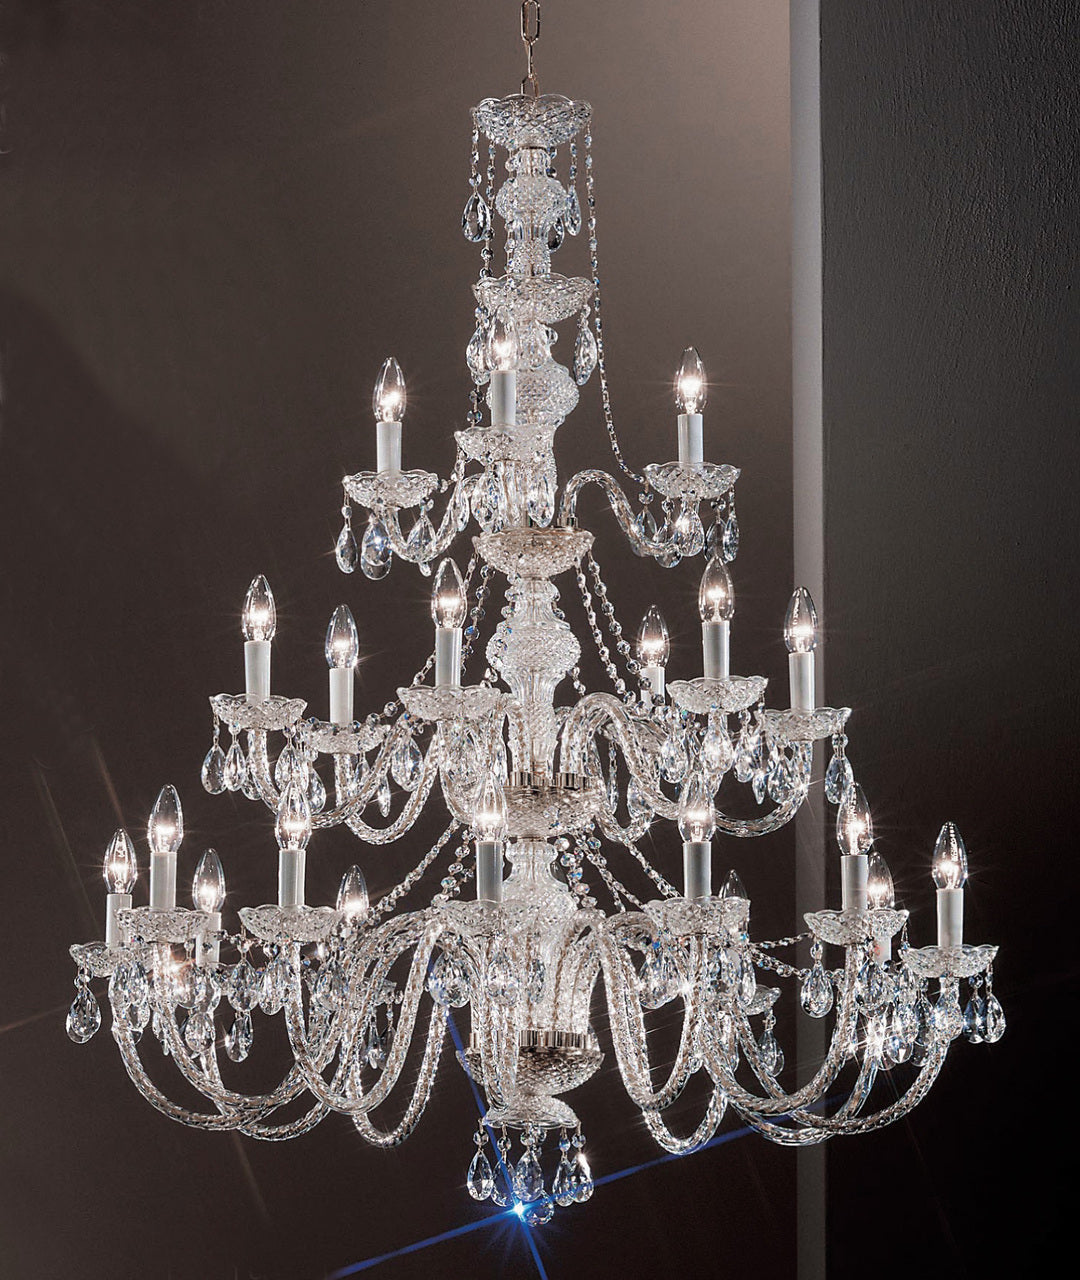 Classic Lighting 8231 CH I Monticello Crystal/Glass Chandelier in Chrome